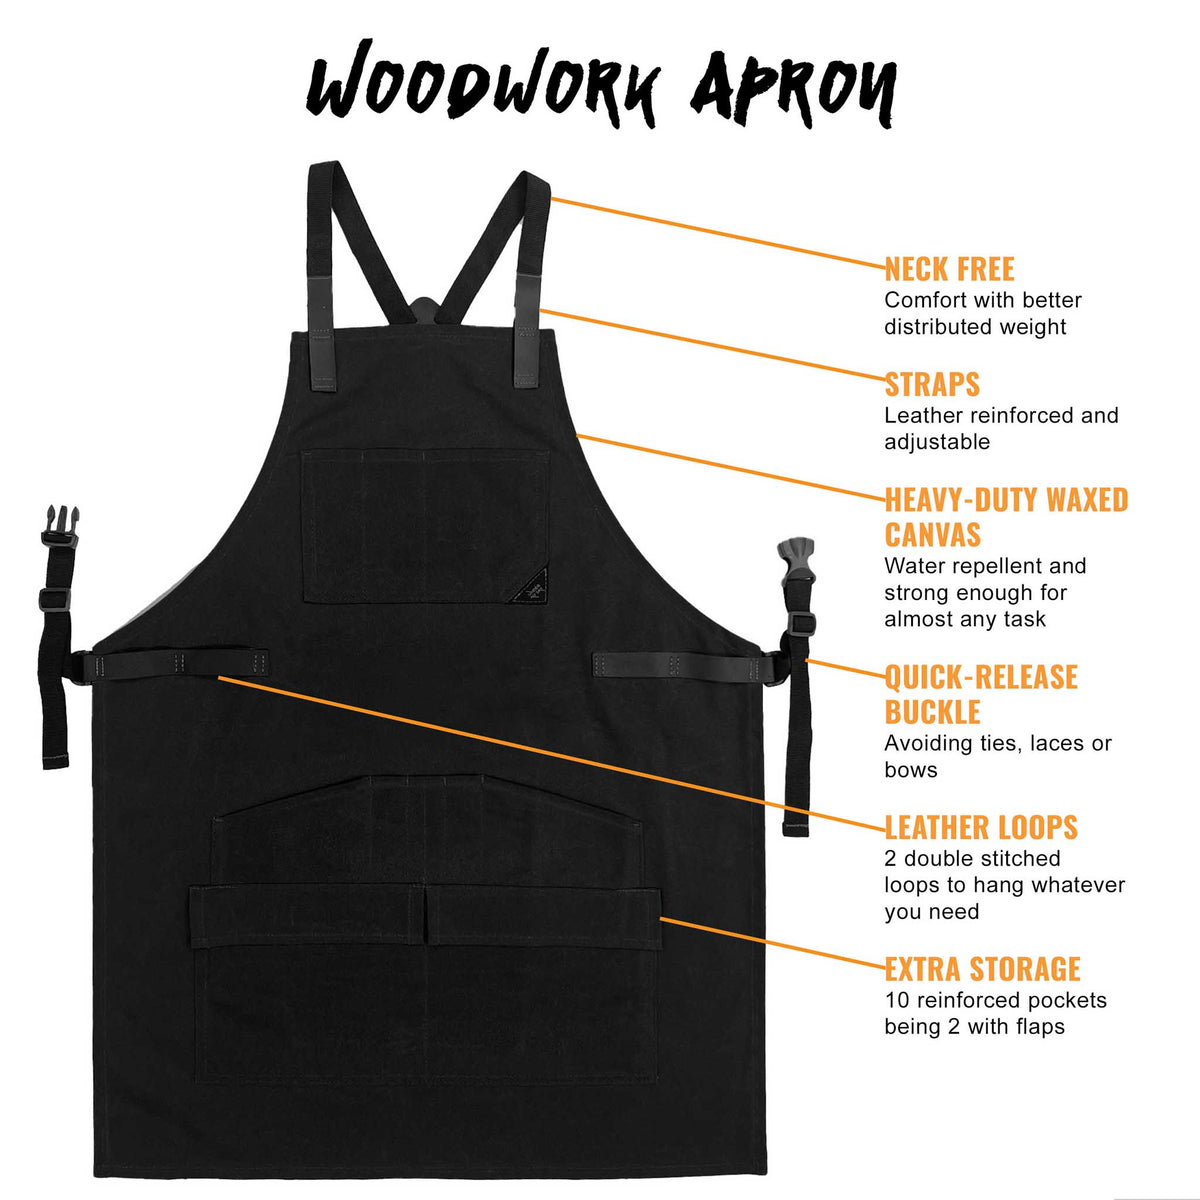 WoodWork Apron Features